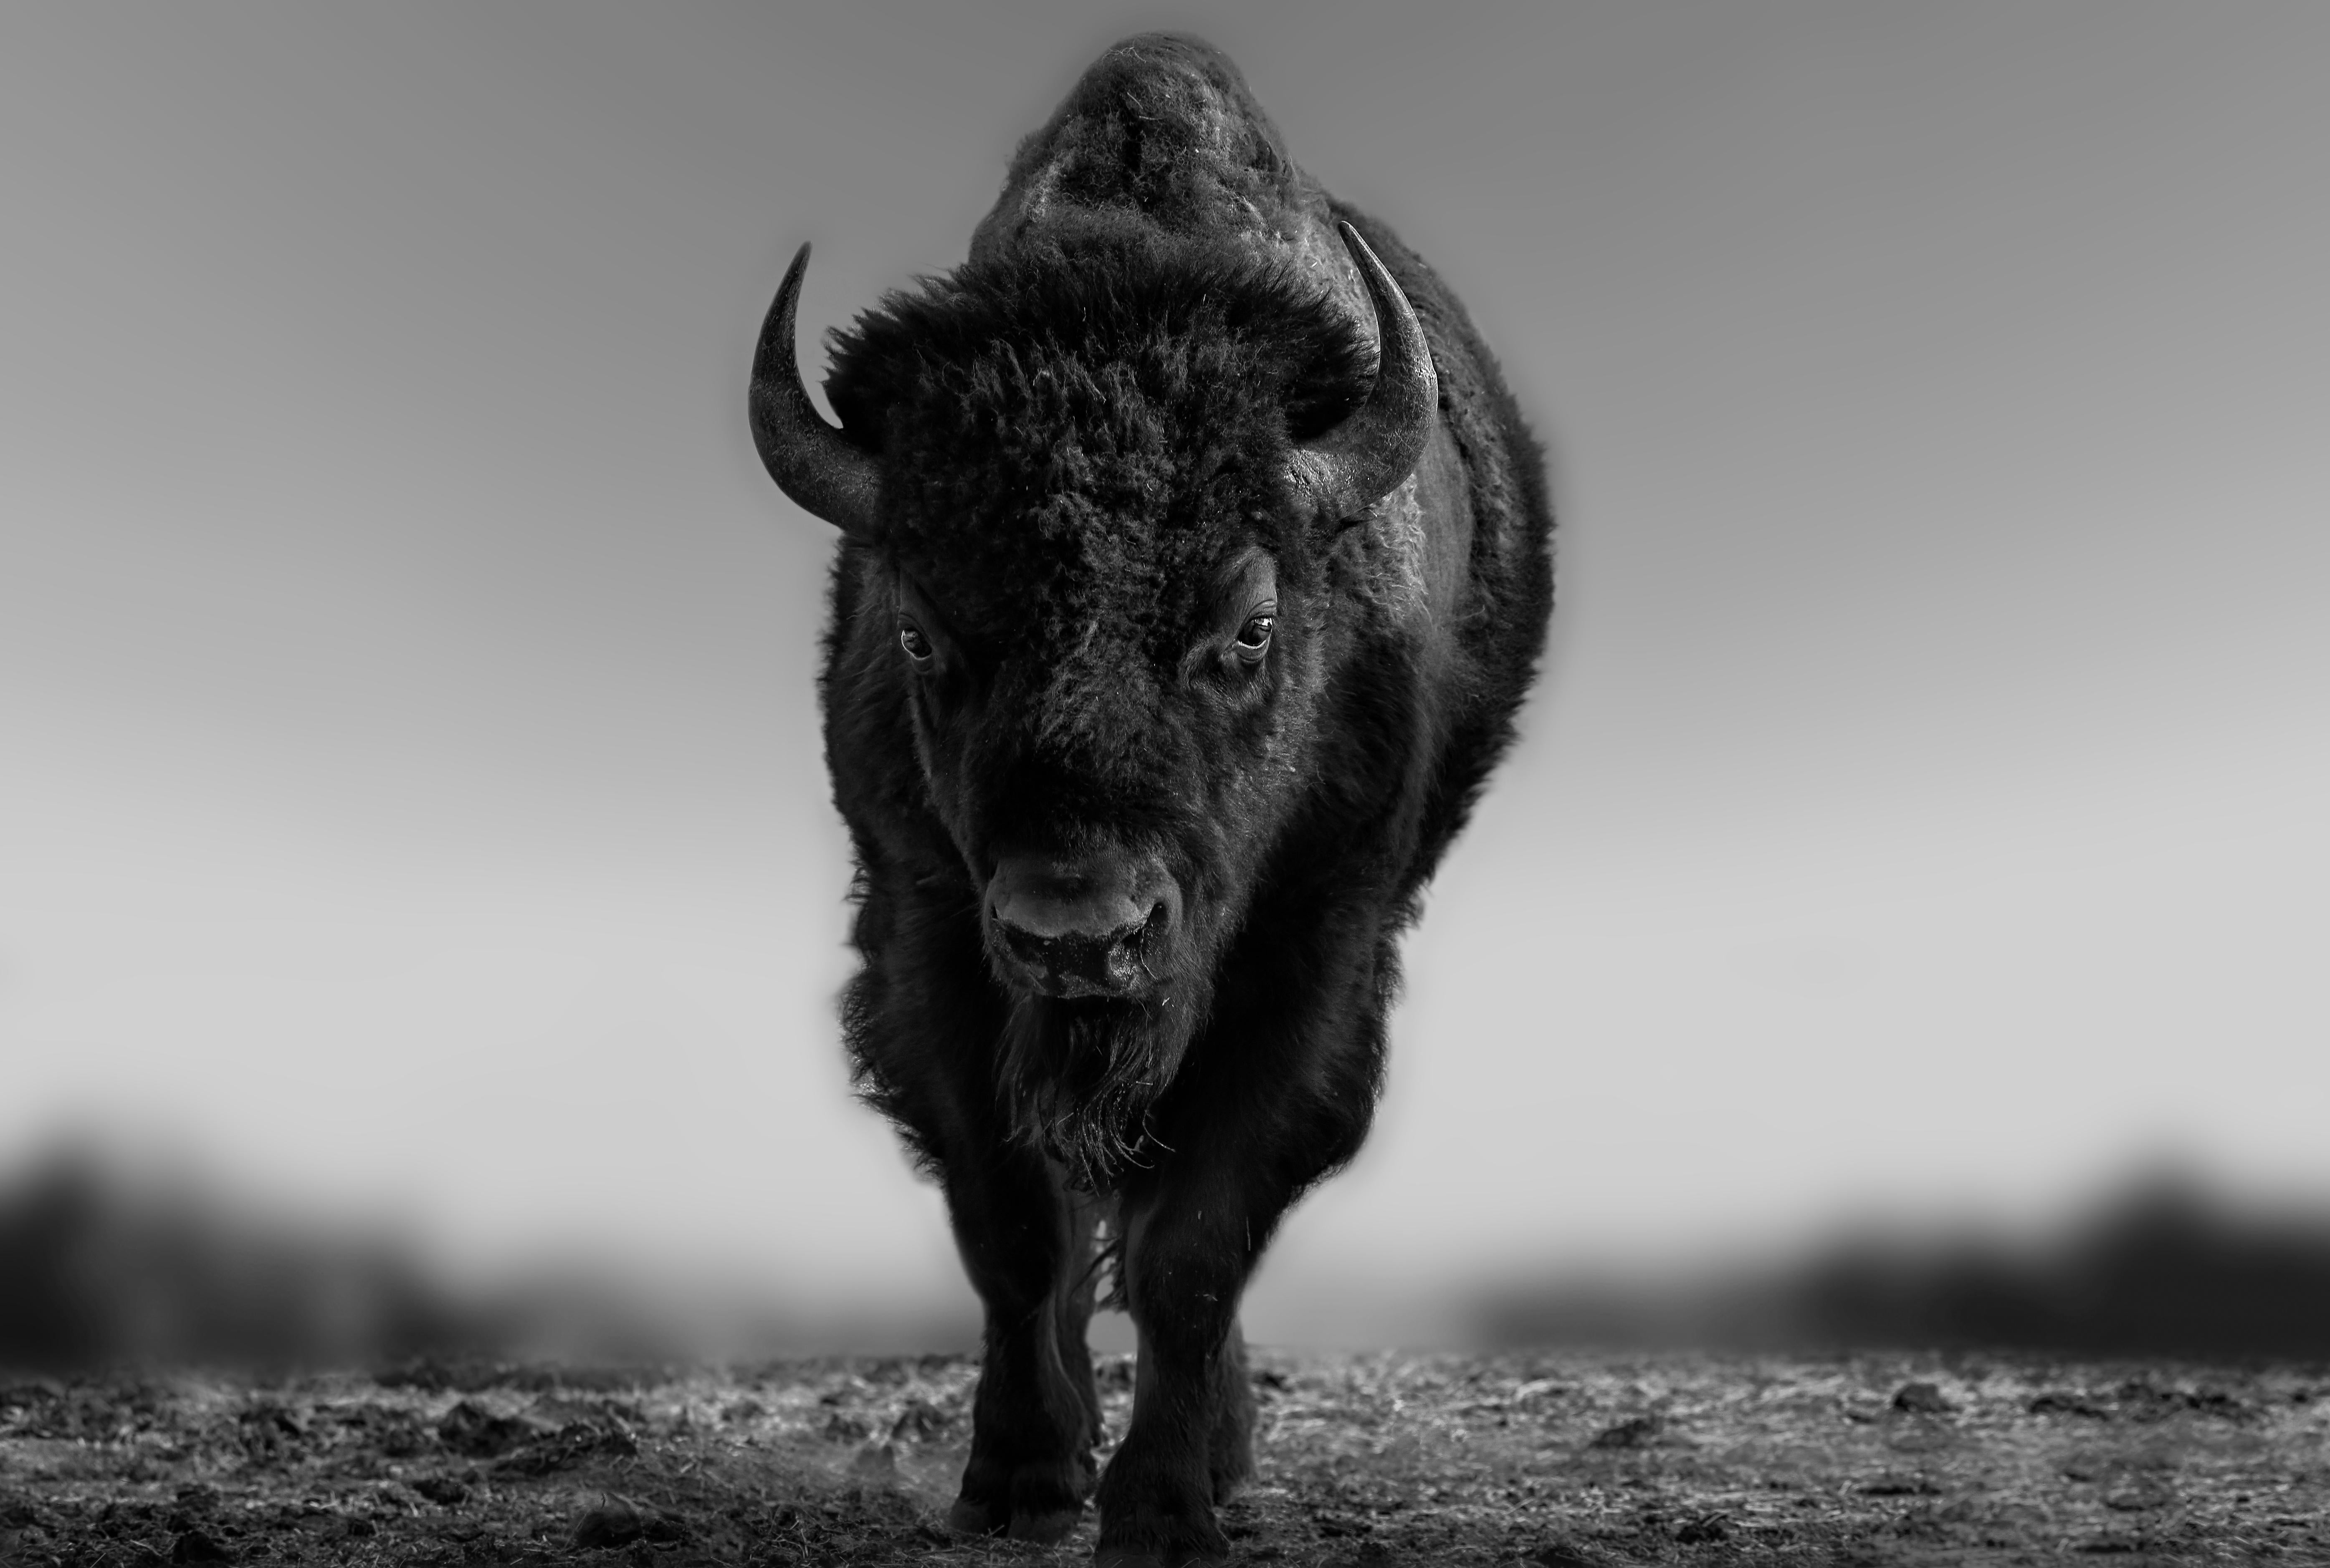 Black and White Photography of Bison, Buffalo "The Beast" 50x60 Photograph